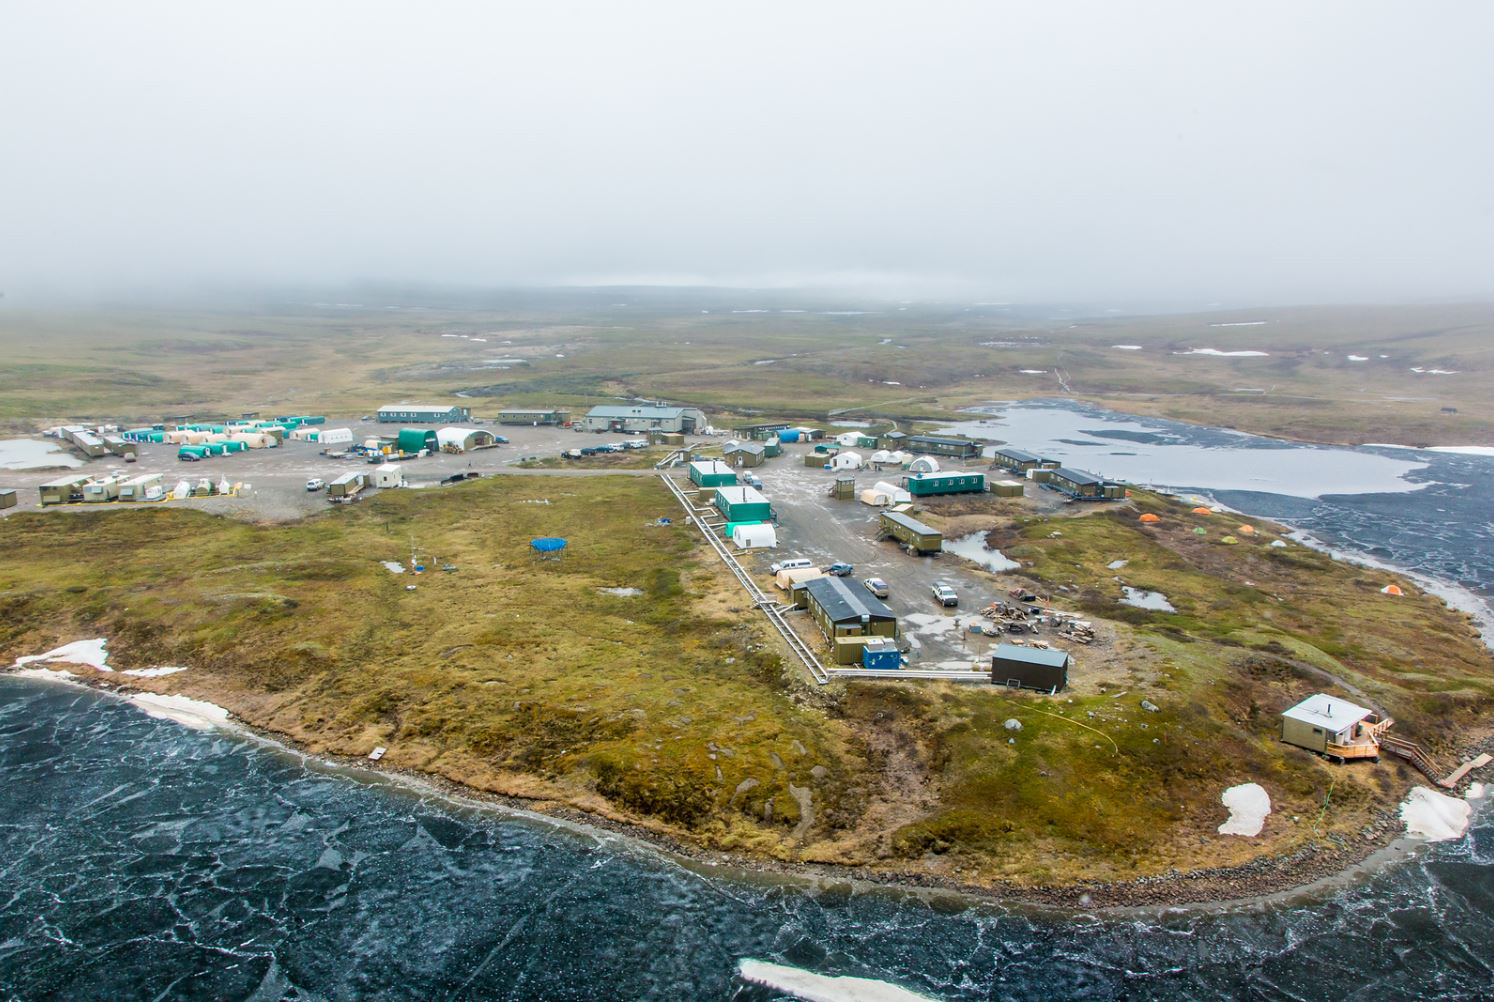 Aerial view of the Toolik Field Station